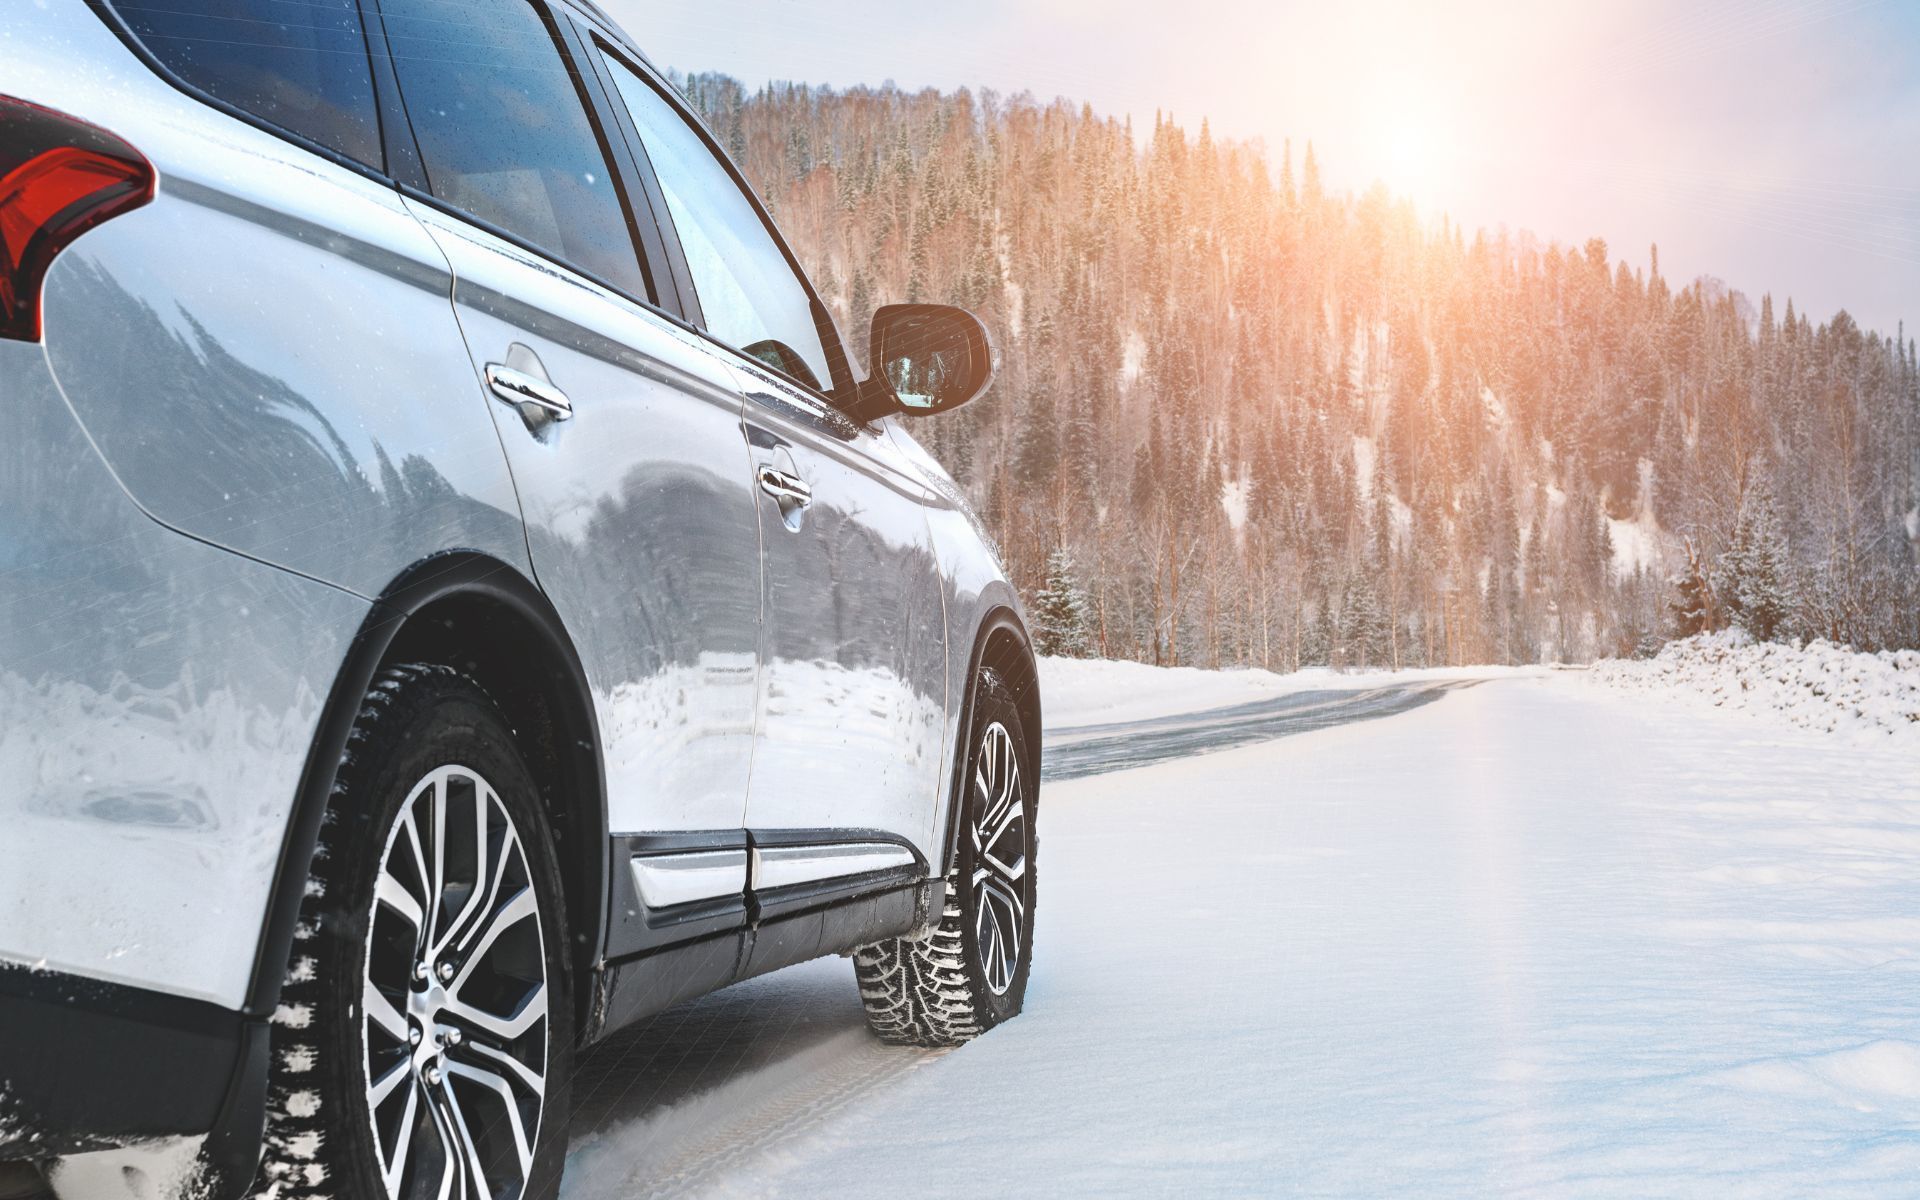 Prepare Your Vehicle for Winter in 8 Simple Steps